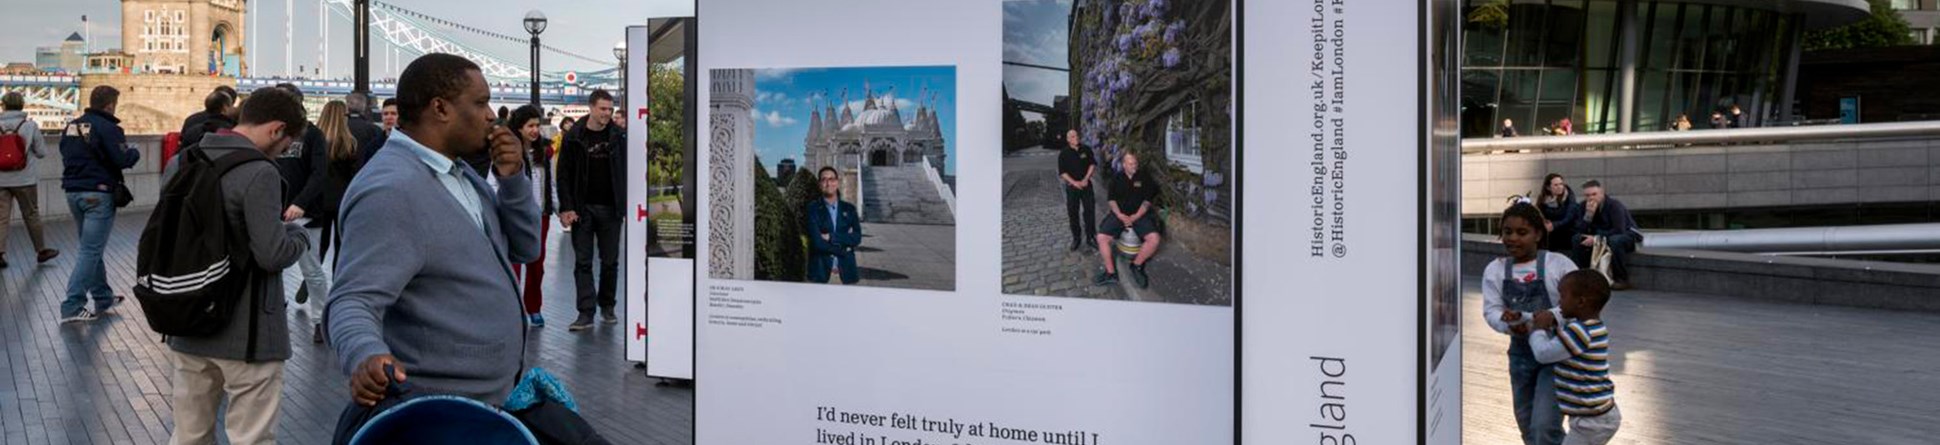 Outdoor exhibition near tower bridge, displaying panels with photos and texts, with people passing by and city hall in the background.